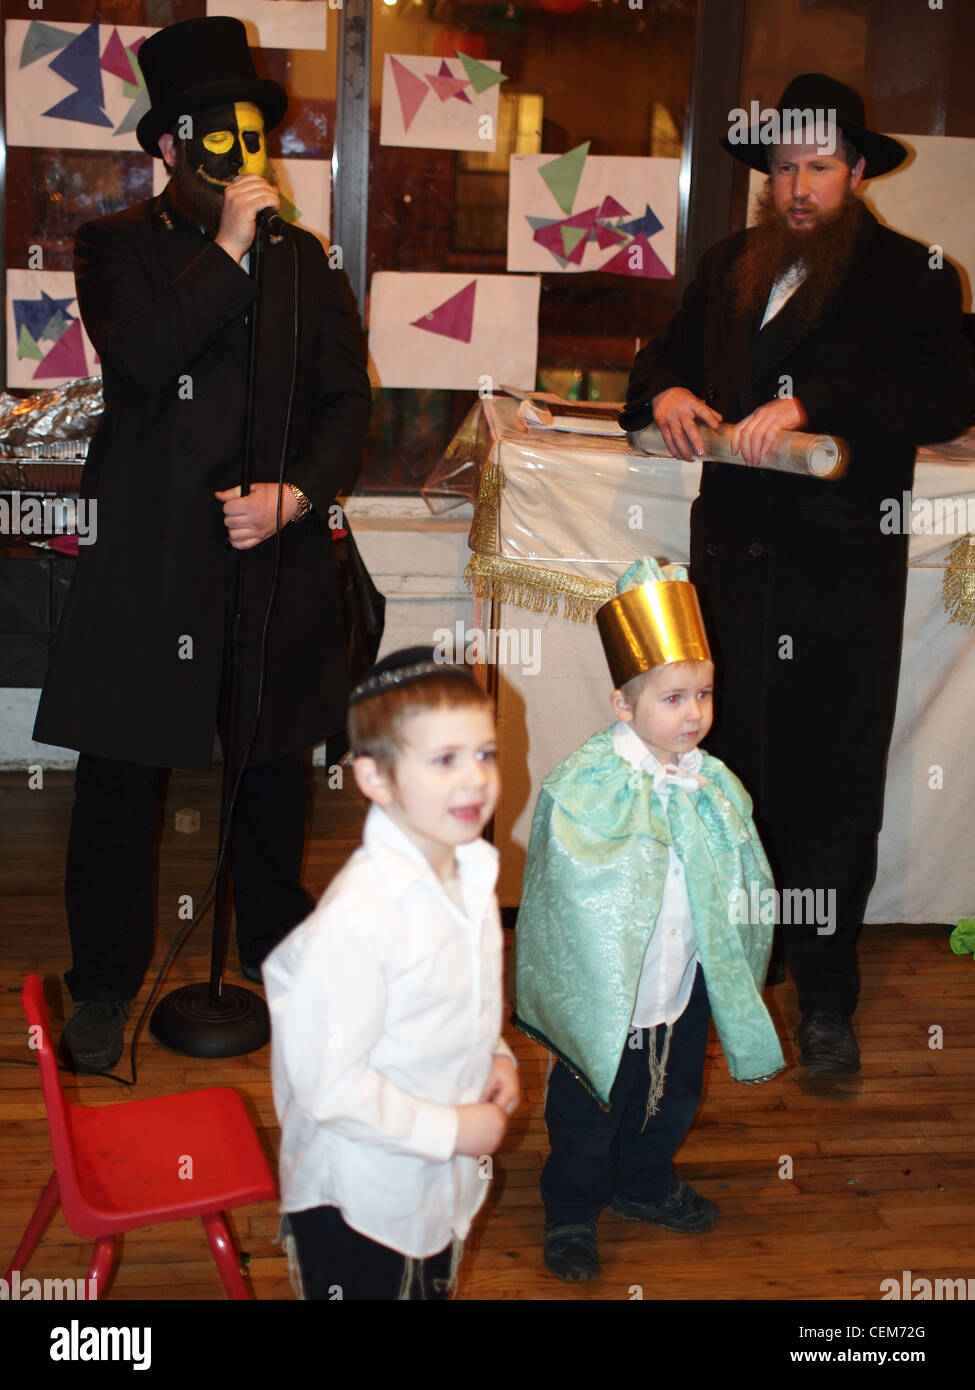 Hassidic Jews of the Chabad Lubavitch branch and their friends